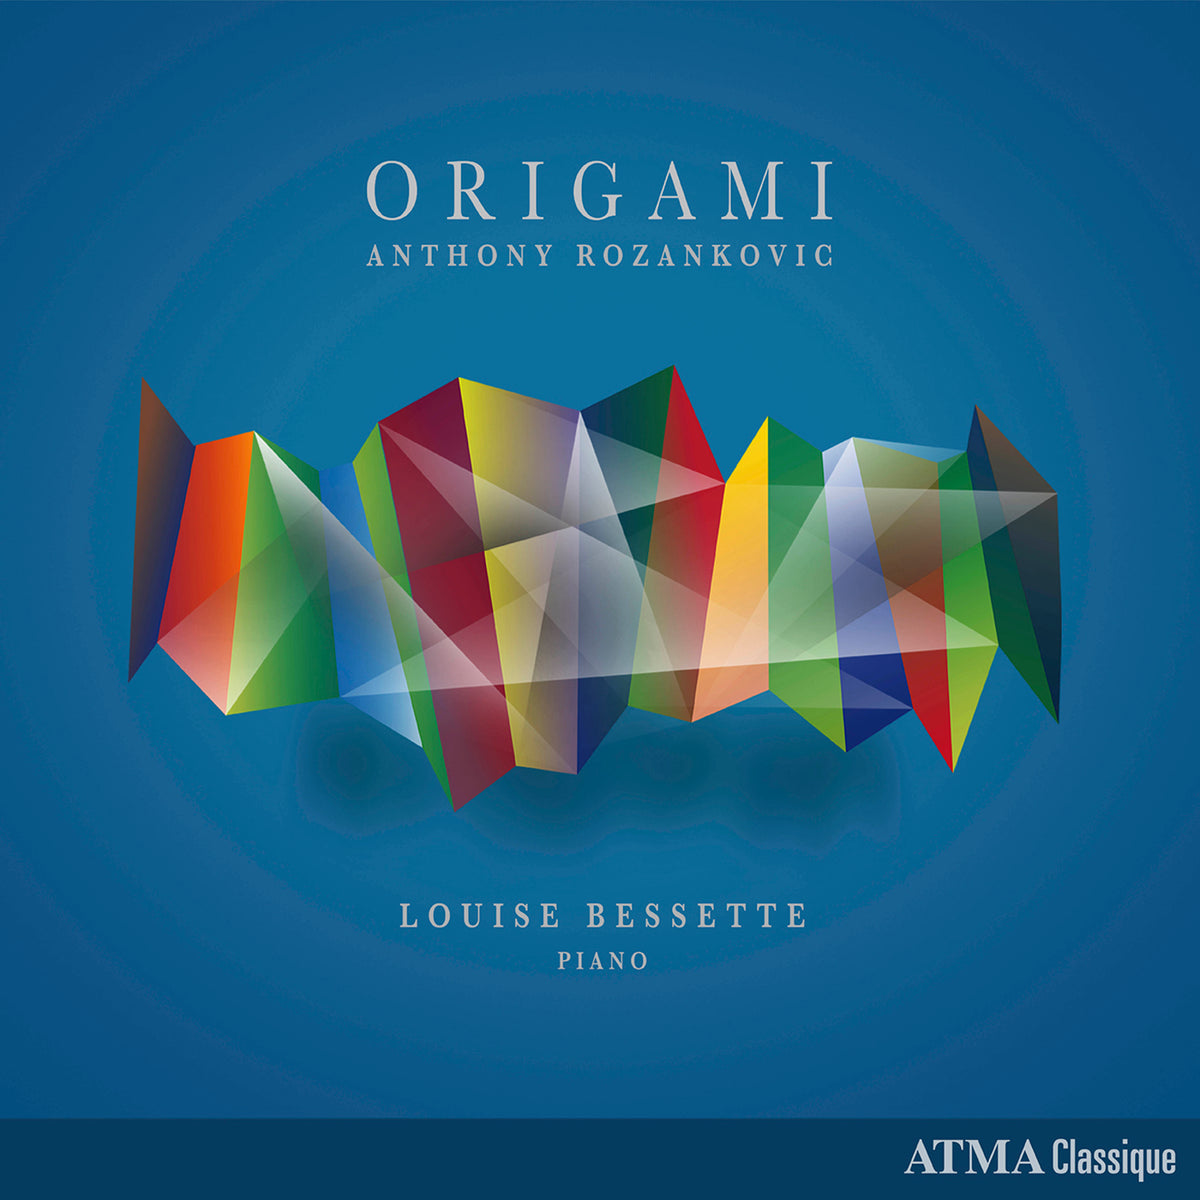 Louise Bessette - Anthony Rozankovic: Origami - ACD22895